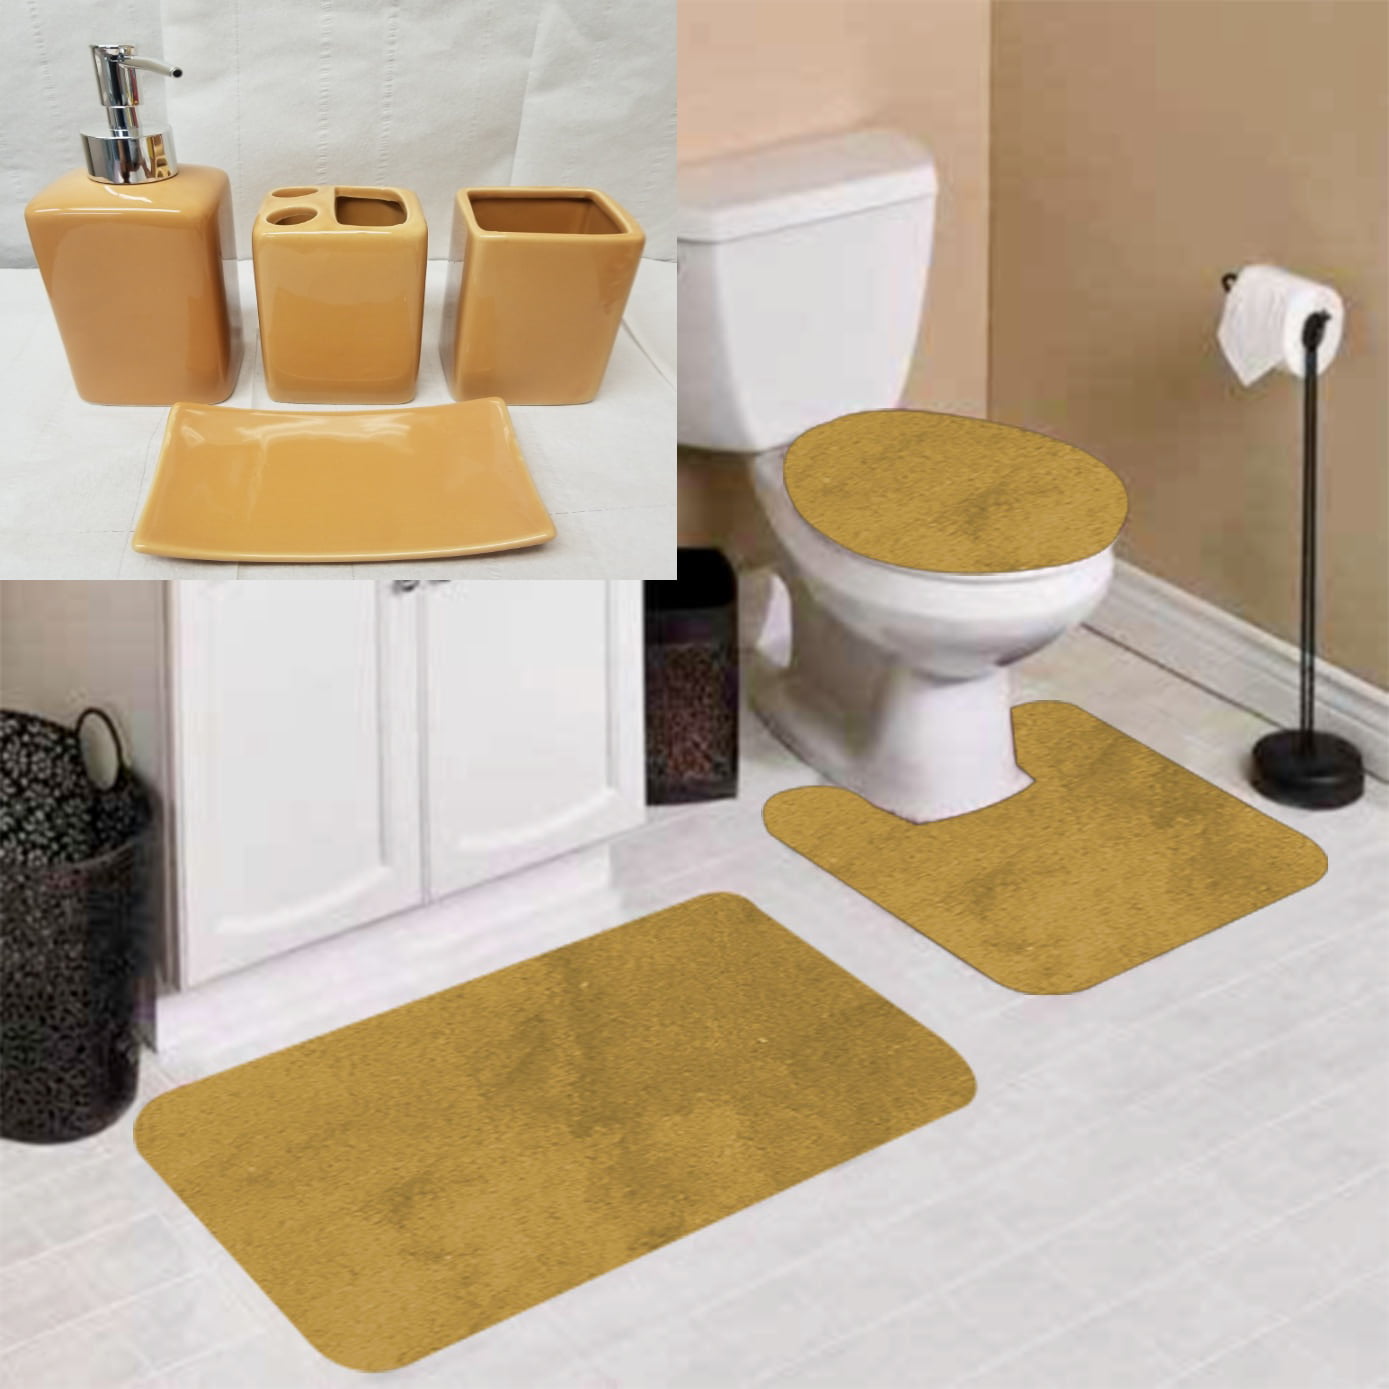 Soft & Dry Bath Rug/Mat Sets for Bathroom Washable Carpets Set Off White BYSURE Ivory/Cream Bathroom Rug Set 3 Piece Non Slip Extra Absorbent Shaggy Chenille Cream Bathroom Rugs and Mats Sets